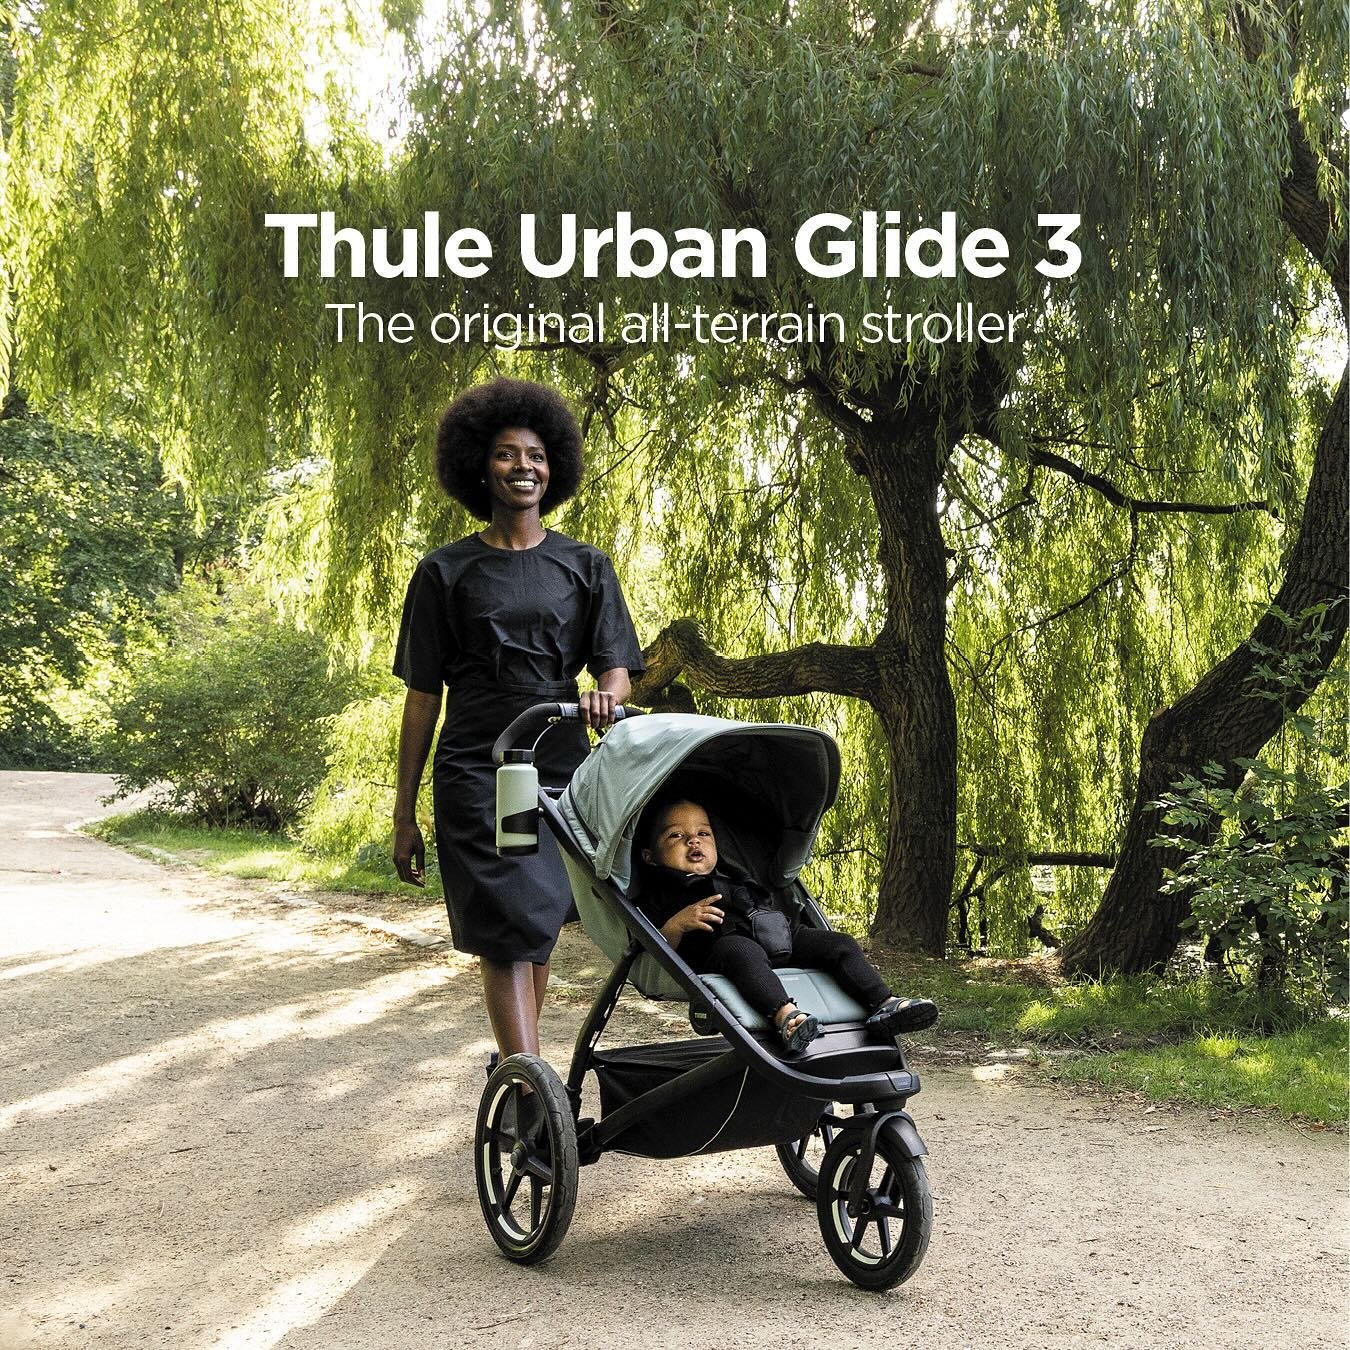 Ready to explore with your little one?

The new #ThuleUrbanGlide3 and #ThuleUrbanGlide4Wheel are the perfect partners for your next adventure, offering unmatched comfort and style.

Find @thule and @familylifebythule during @hey.milestone @greatbigfa